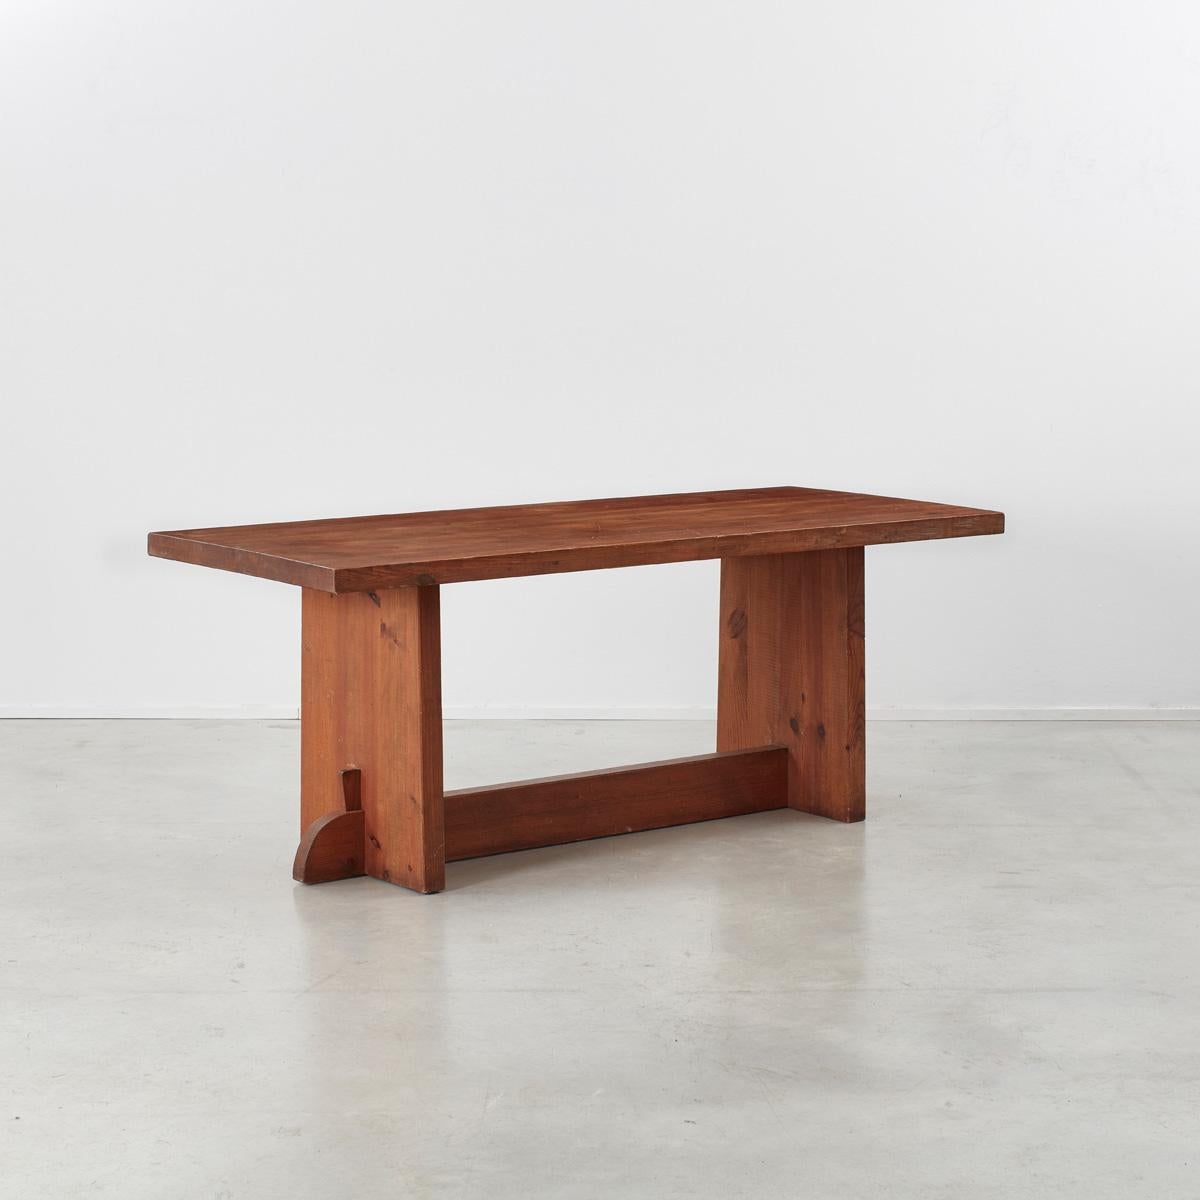 A Swedish Pine Lovö dining table designed by Axel Einar Hjorth for Nordiska Kompaniet in the 1930s. Hjorth was major contributor to the burgeoning Swedish design culture that was recognised internationally in the 1920s. He effectively introduced